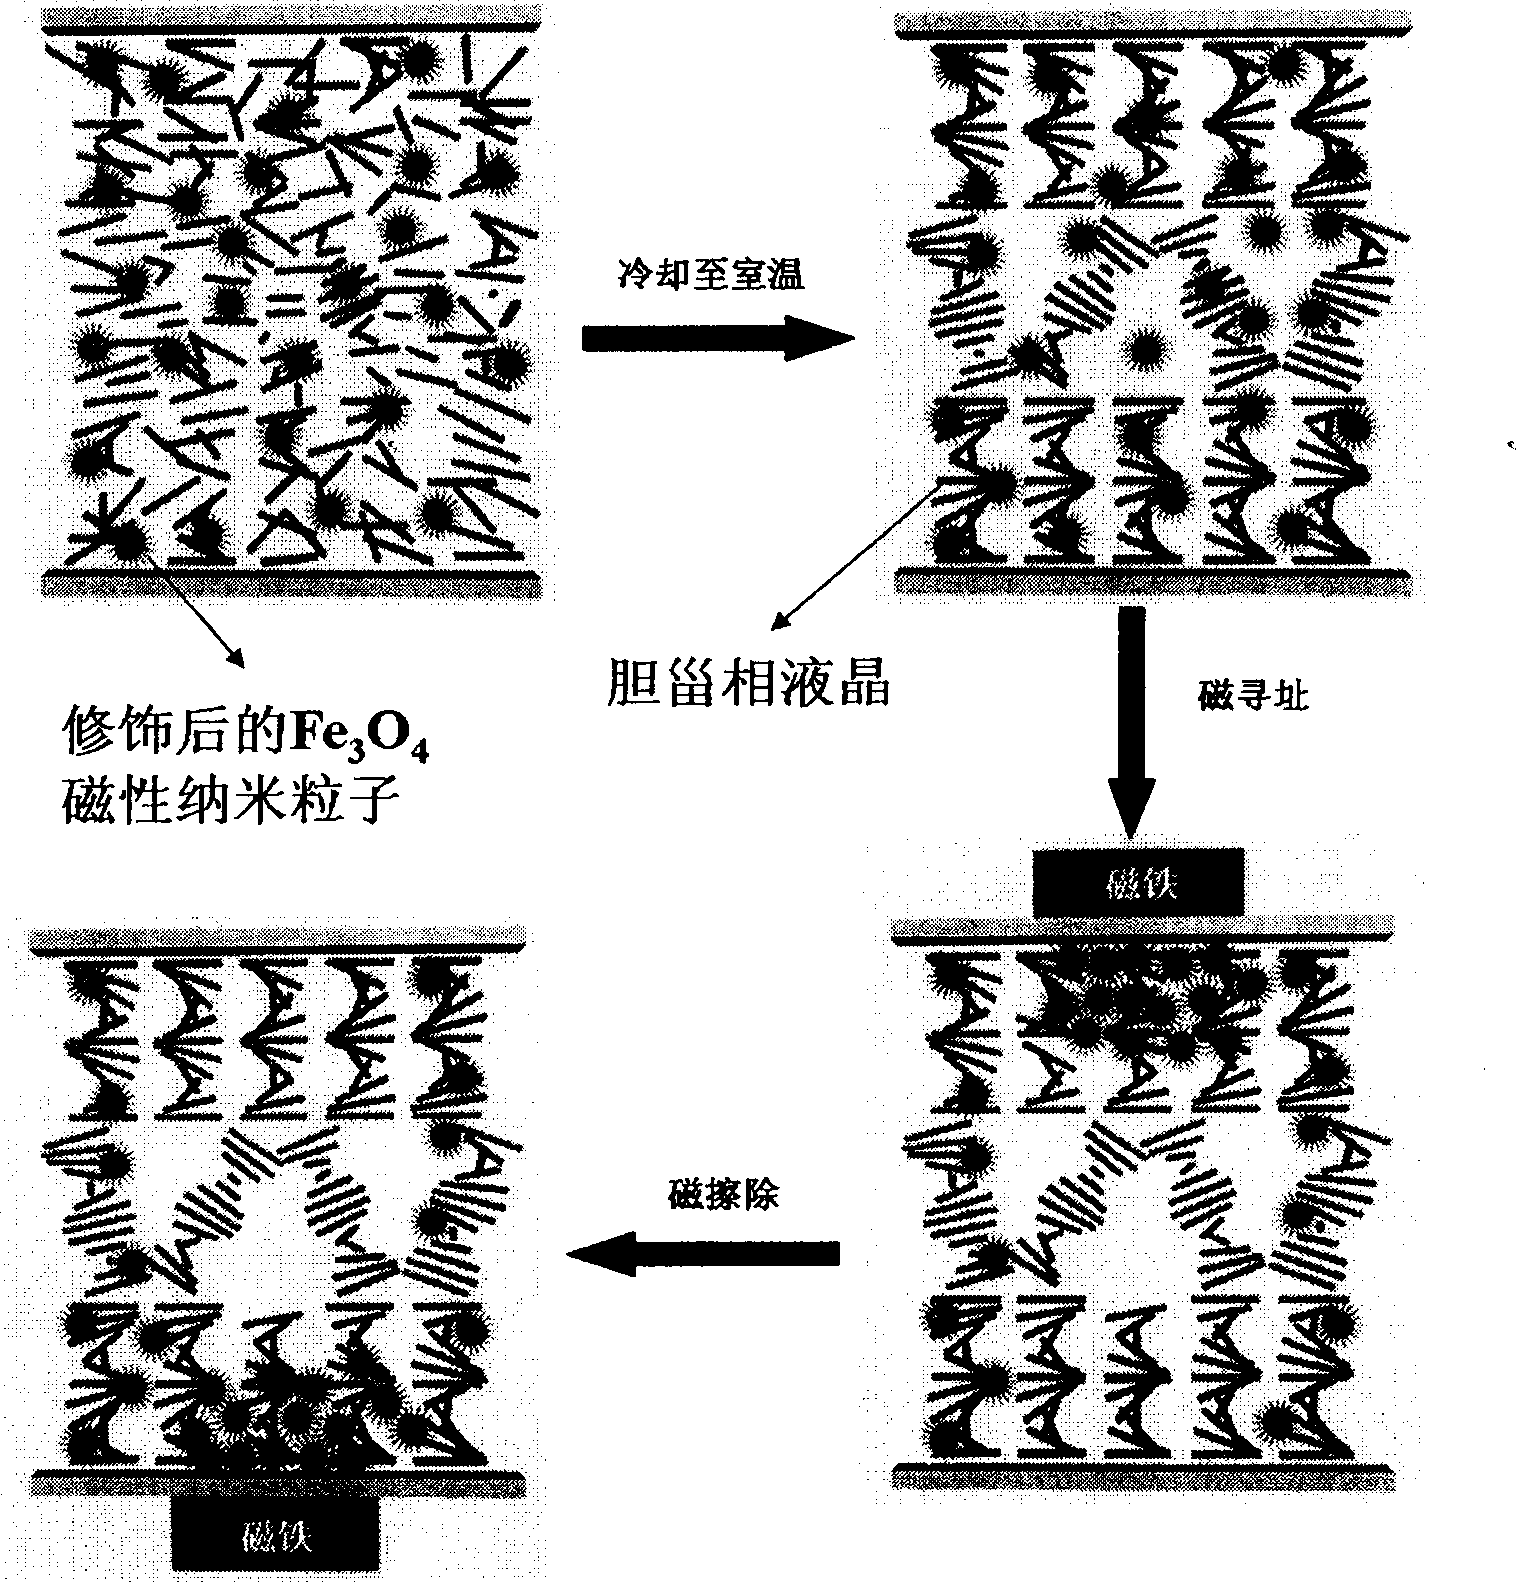 Method for producing electronic paper material with magnetic addressing and erasing characteristic